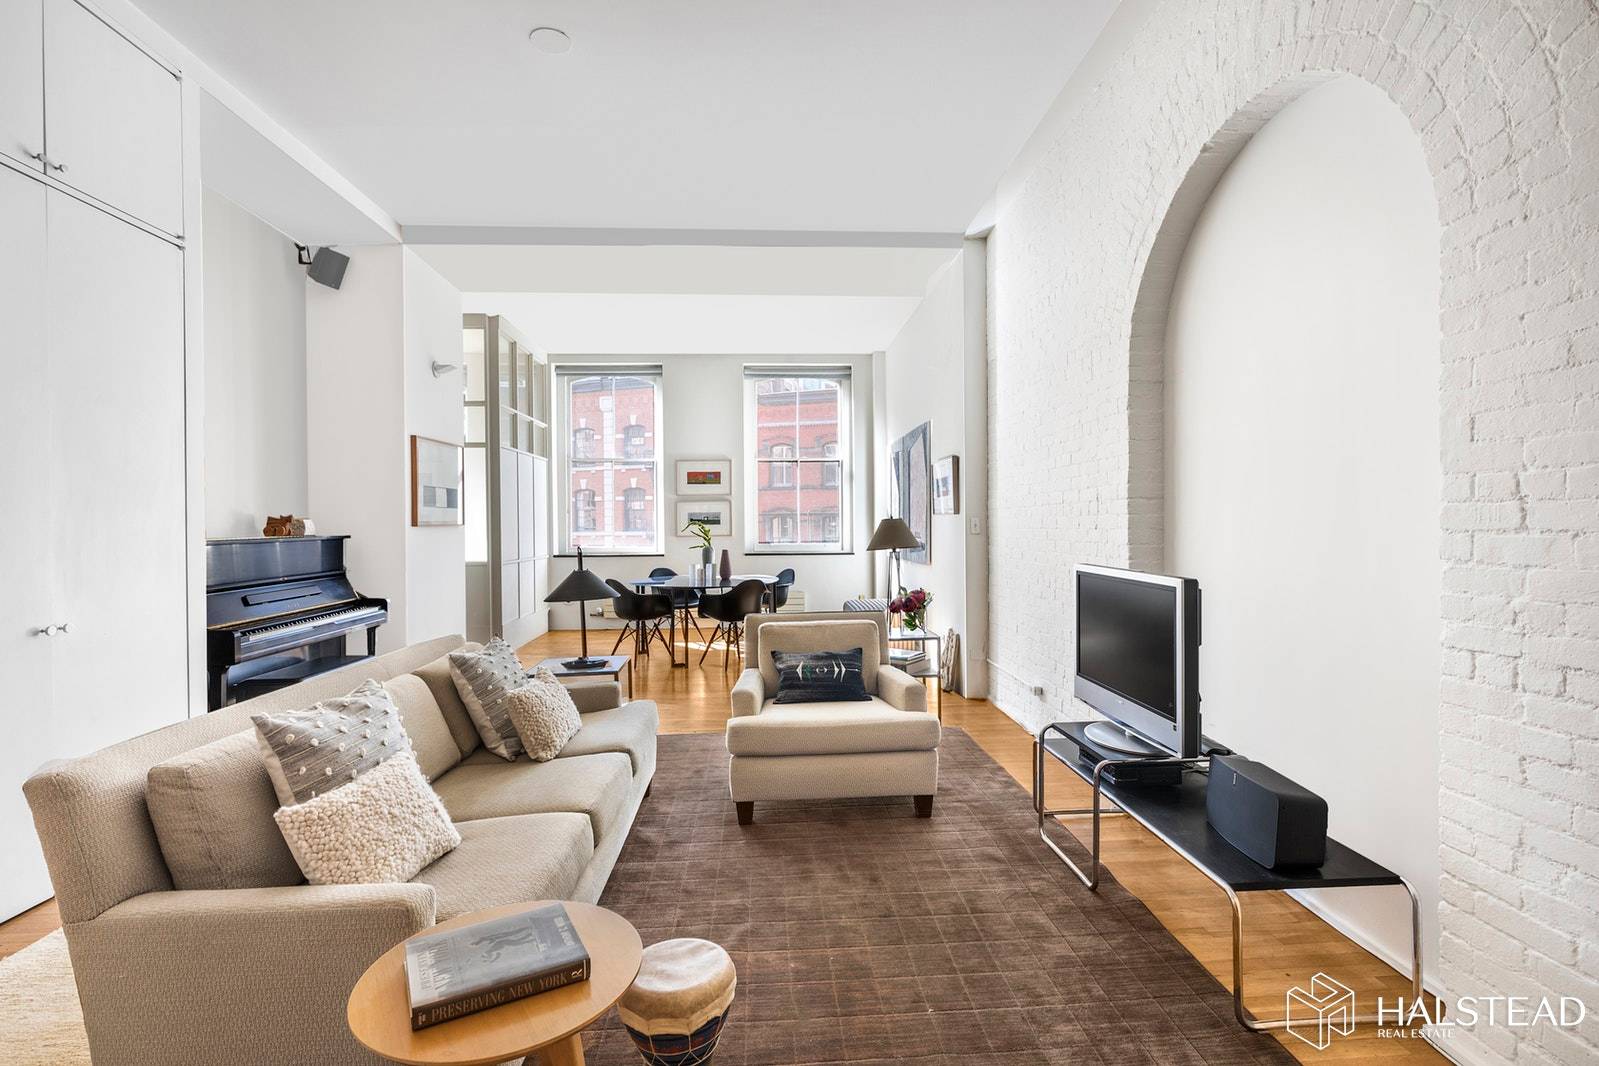 This rare and classic full floor loft is located on one of the most desirable blocks in Tribeca and offers brilliant light, a flexible 3 bedroom layout and a sense ...